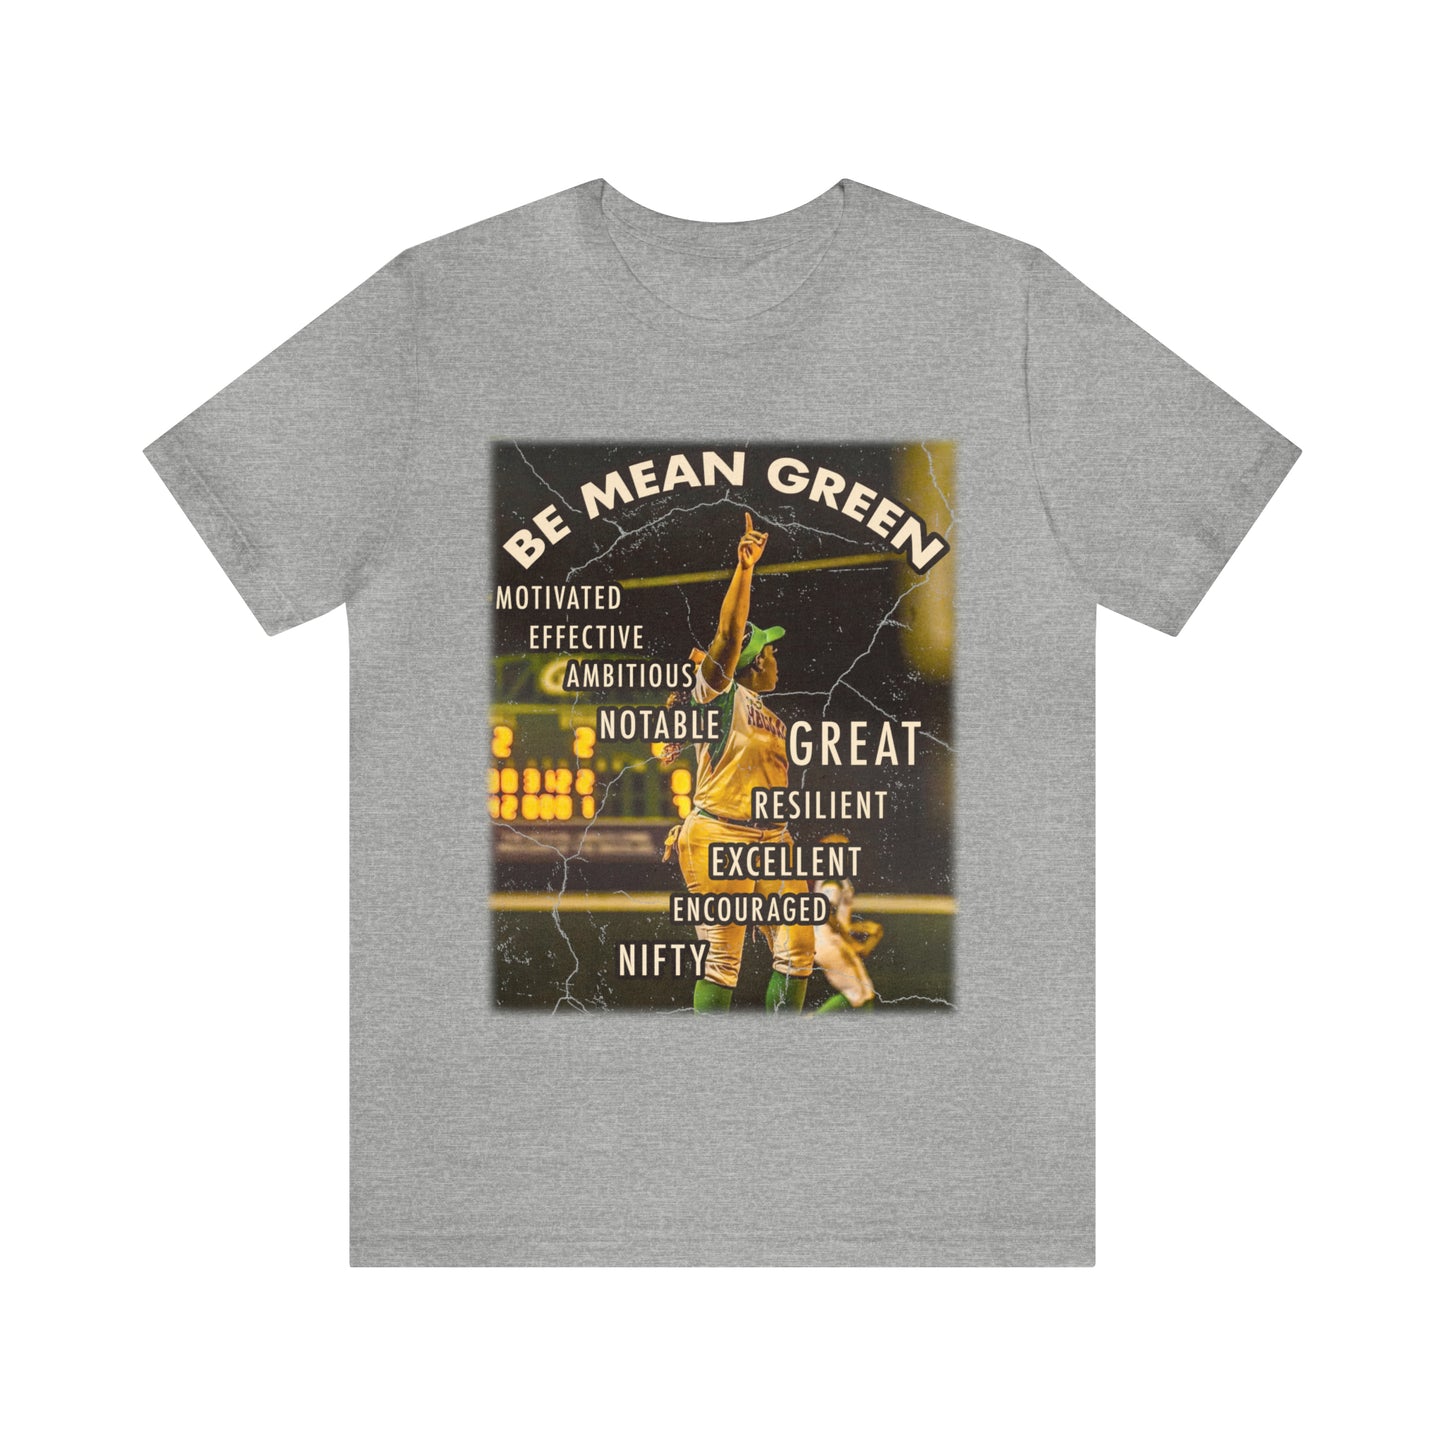 Sydney Green: Be Mean Green Tee